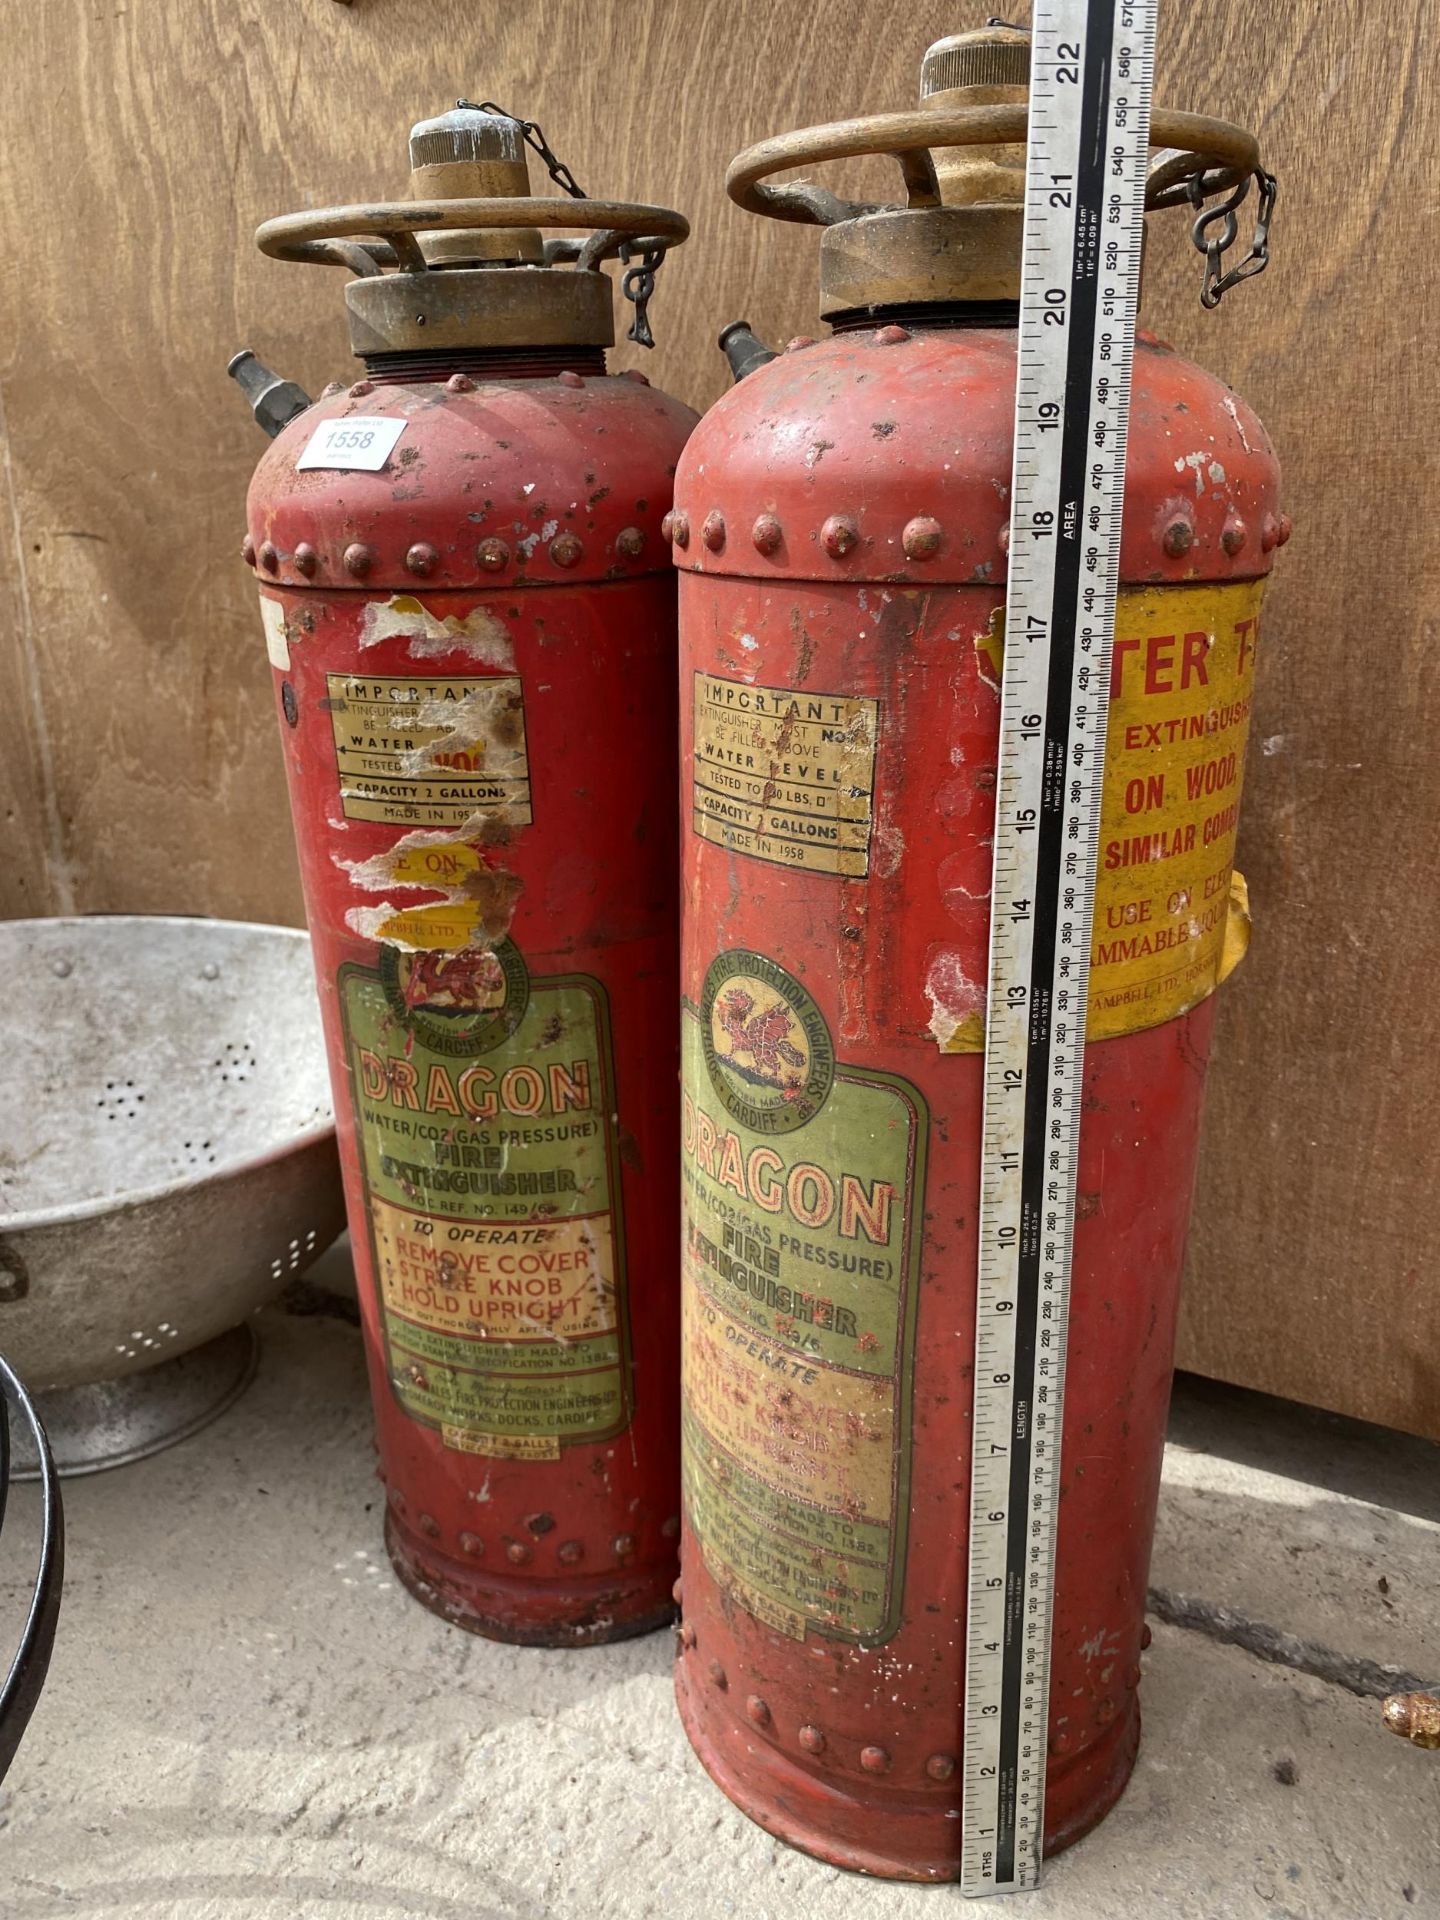 A PAIR OF DRAGON FIRE EXTINGUISHERS - Image 3 of 3